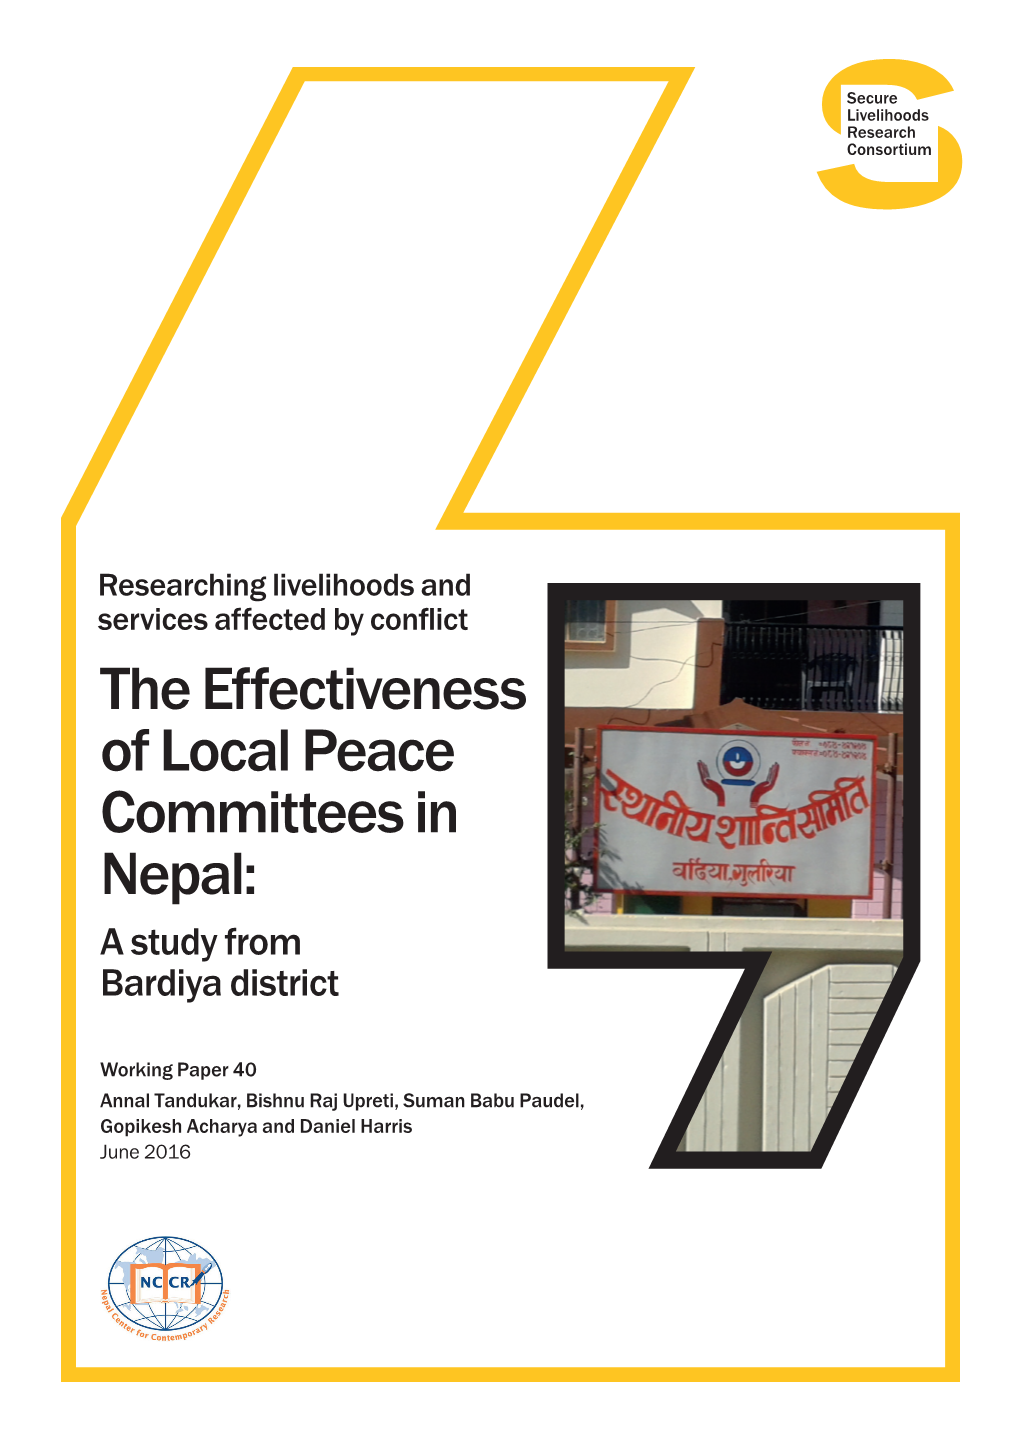 The Effectiveness of Local Peace Committees in Nepal: a Study from Bardiya District